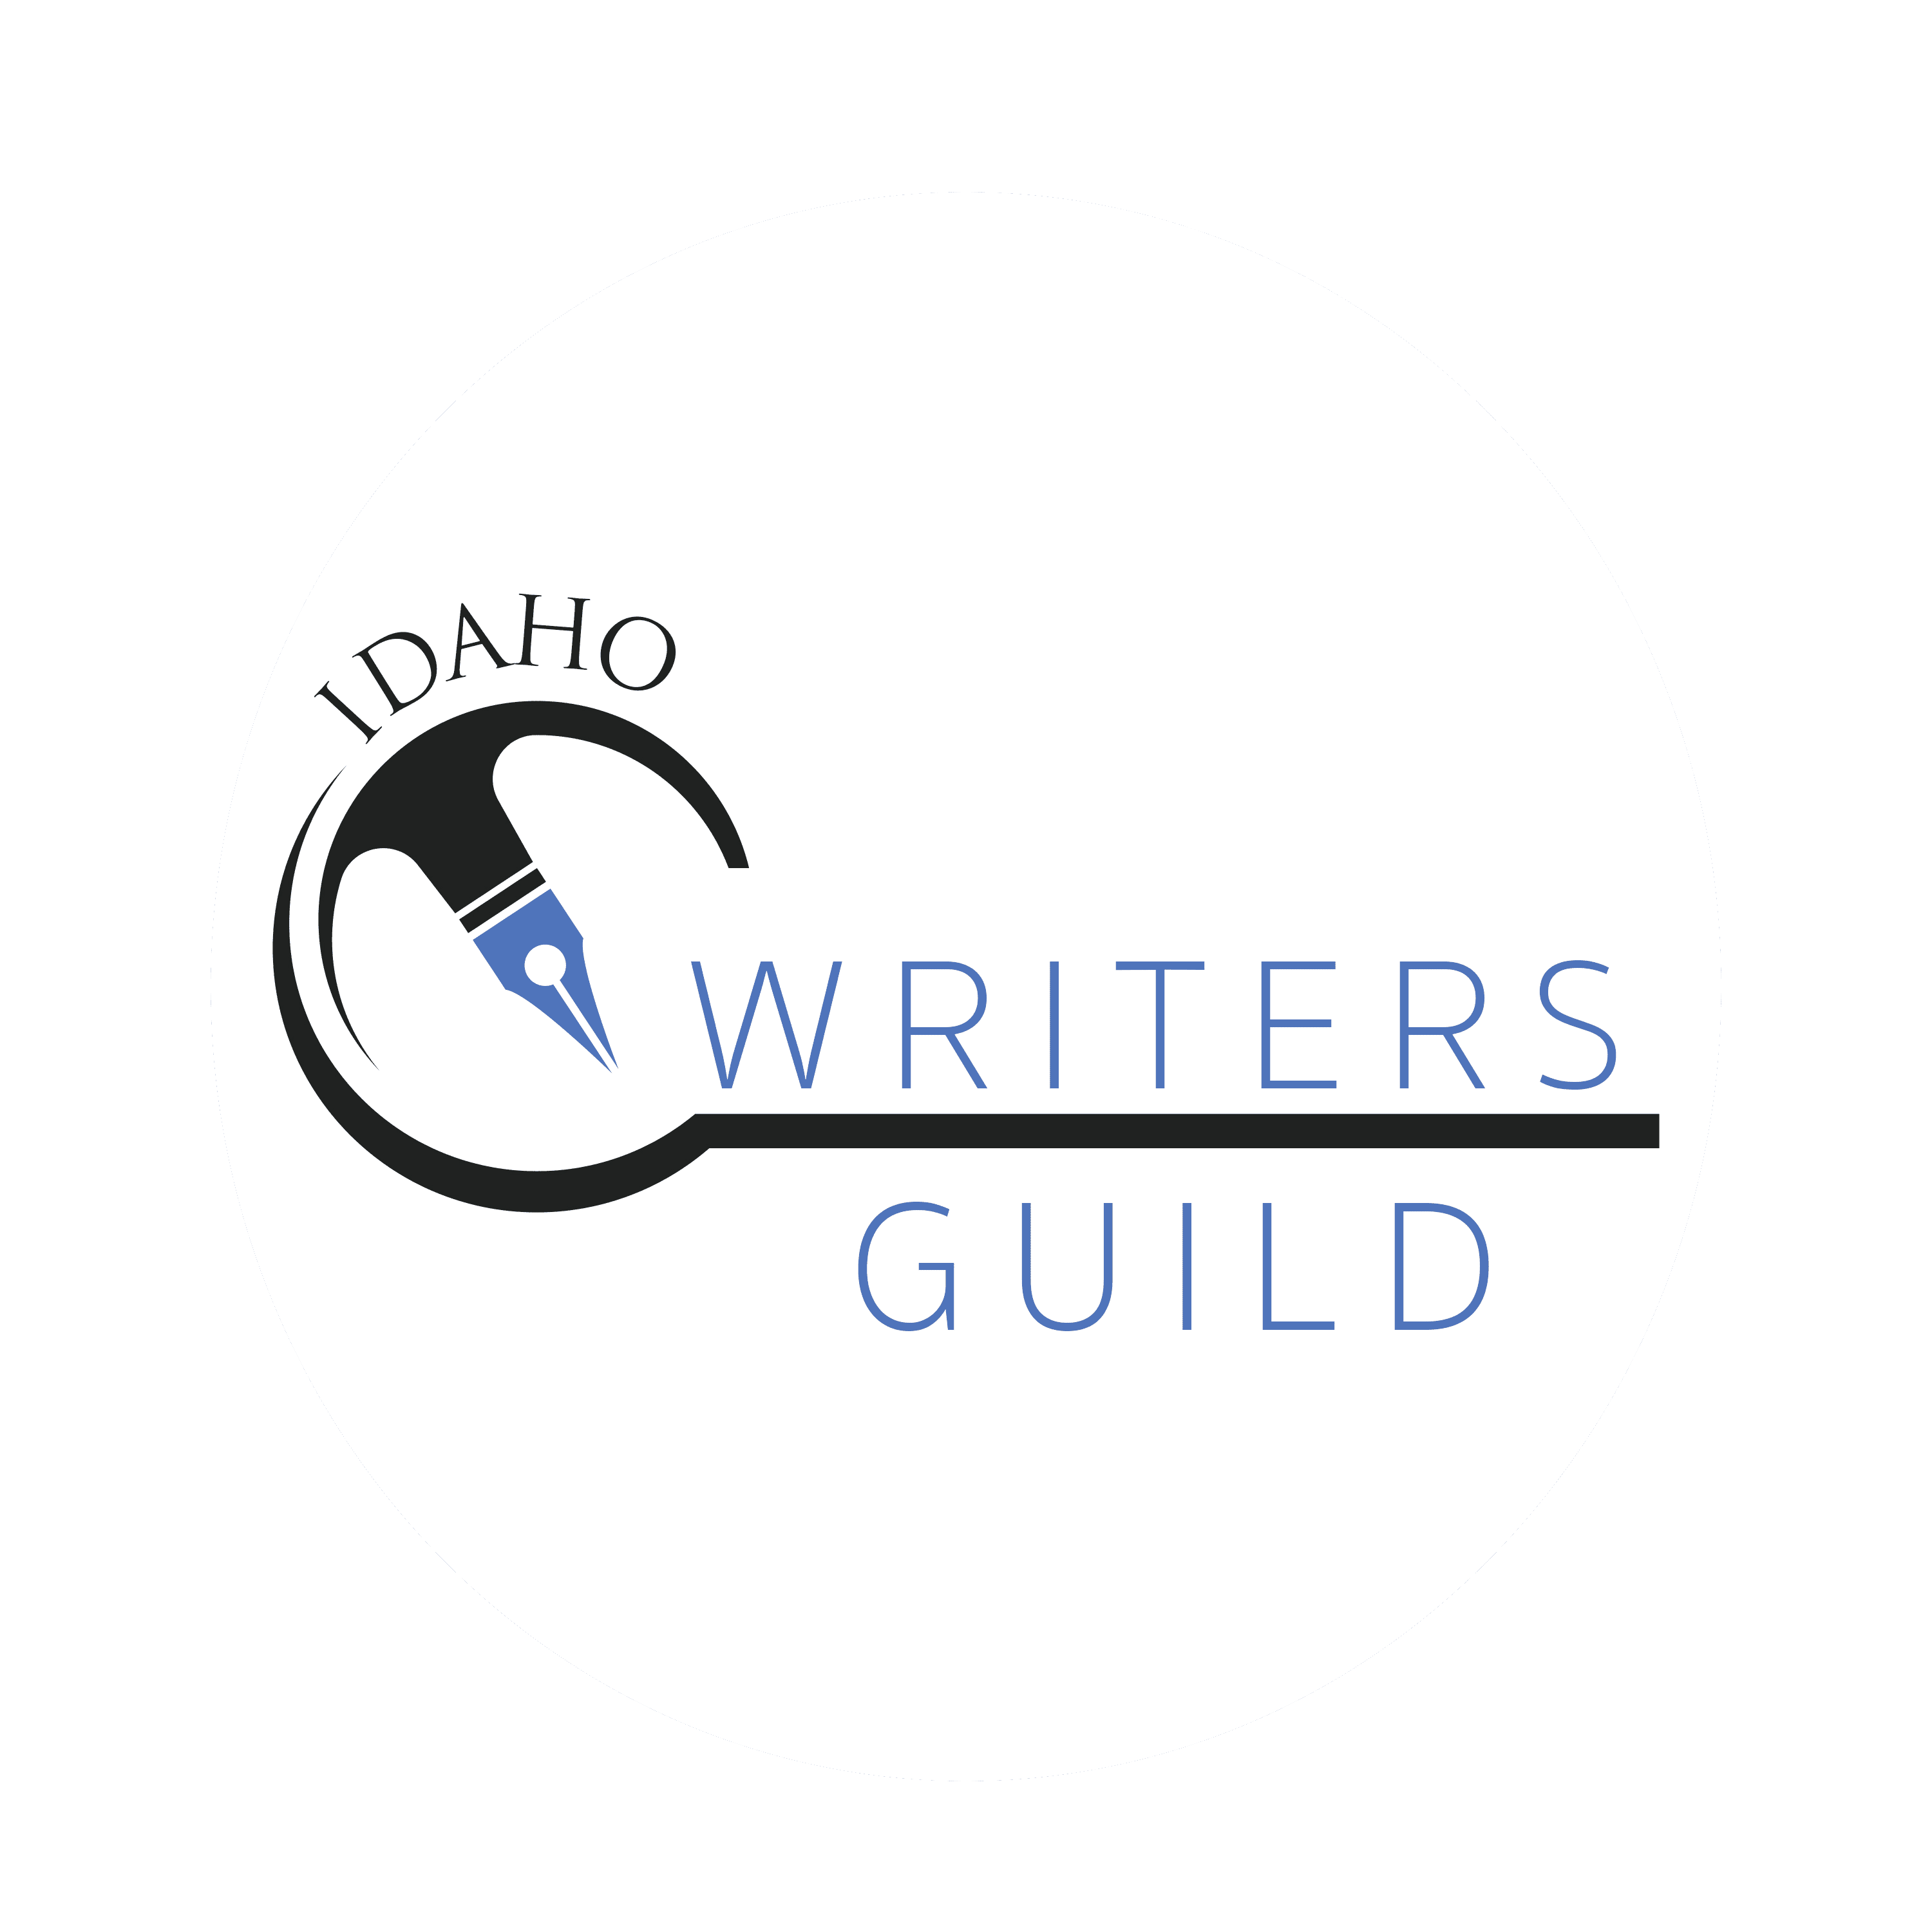 creative writing classes events